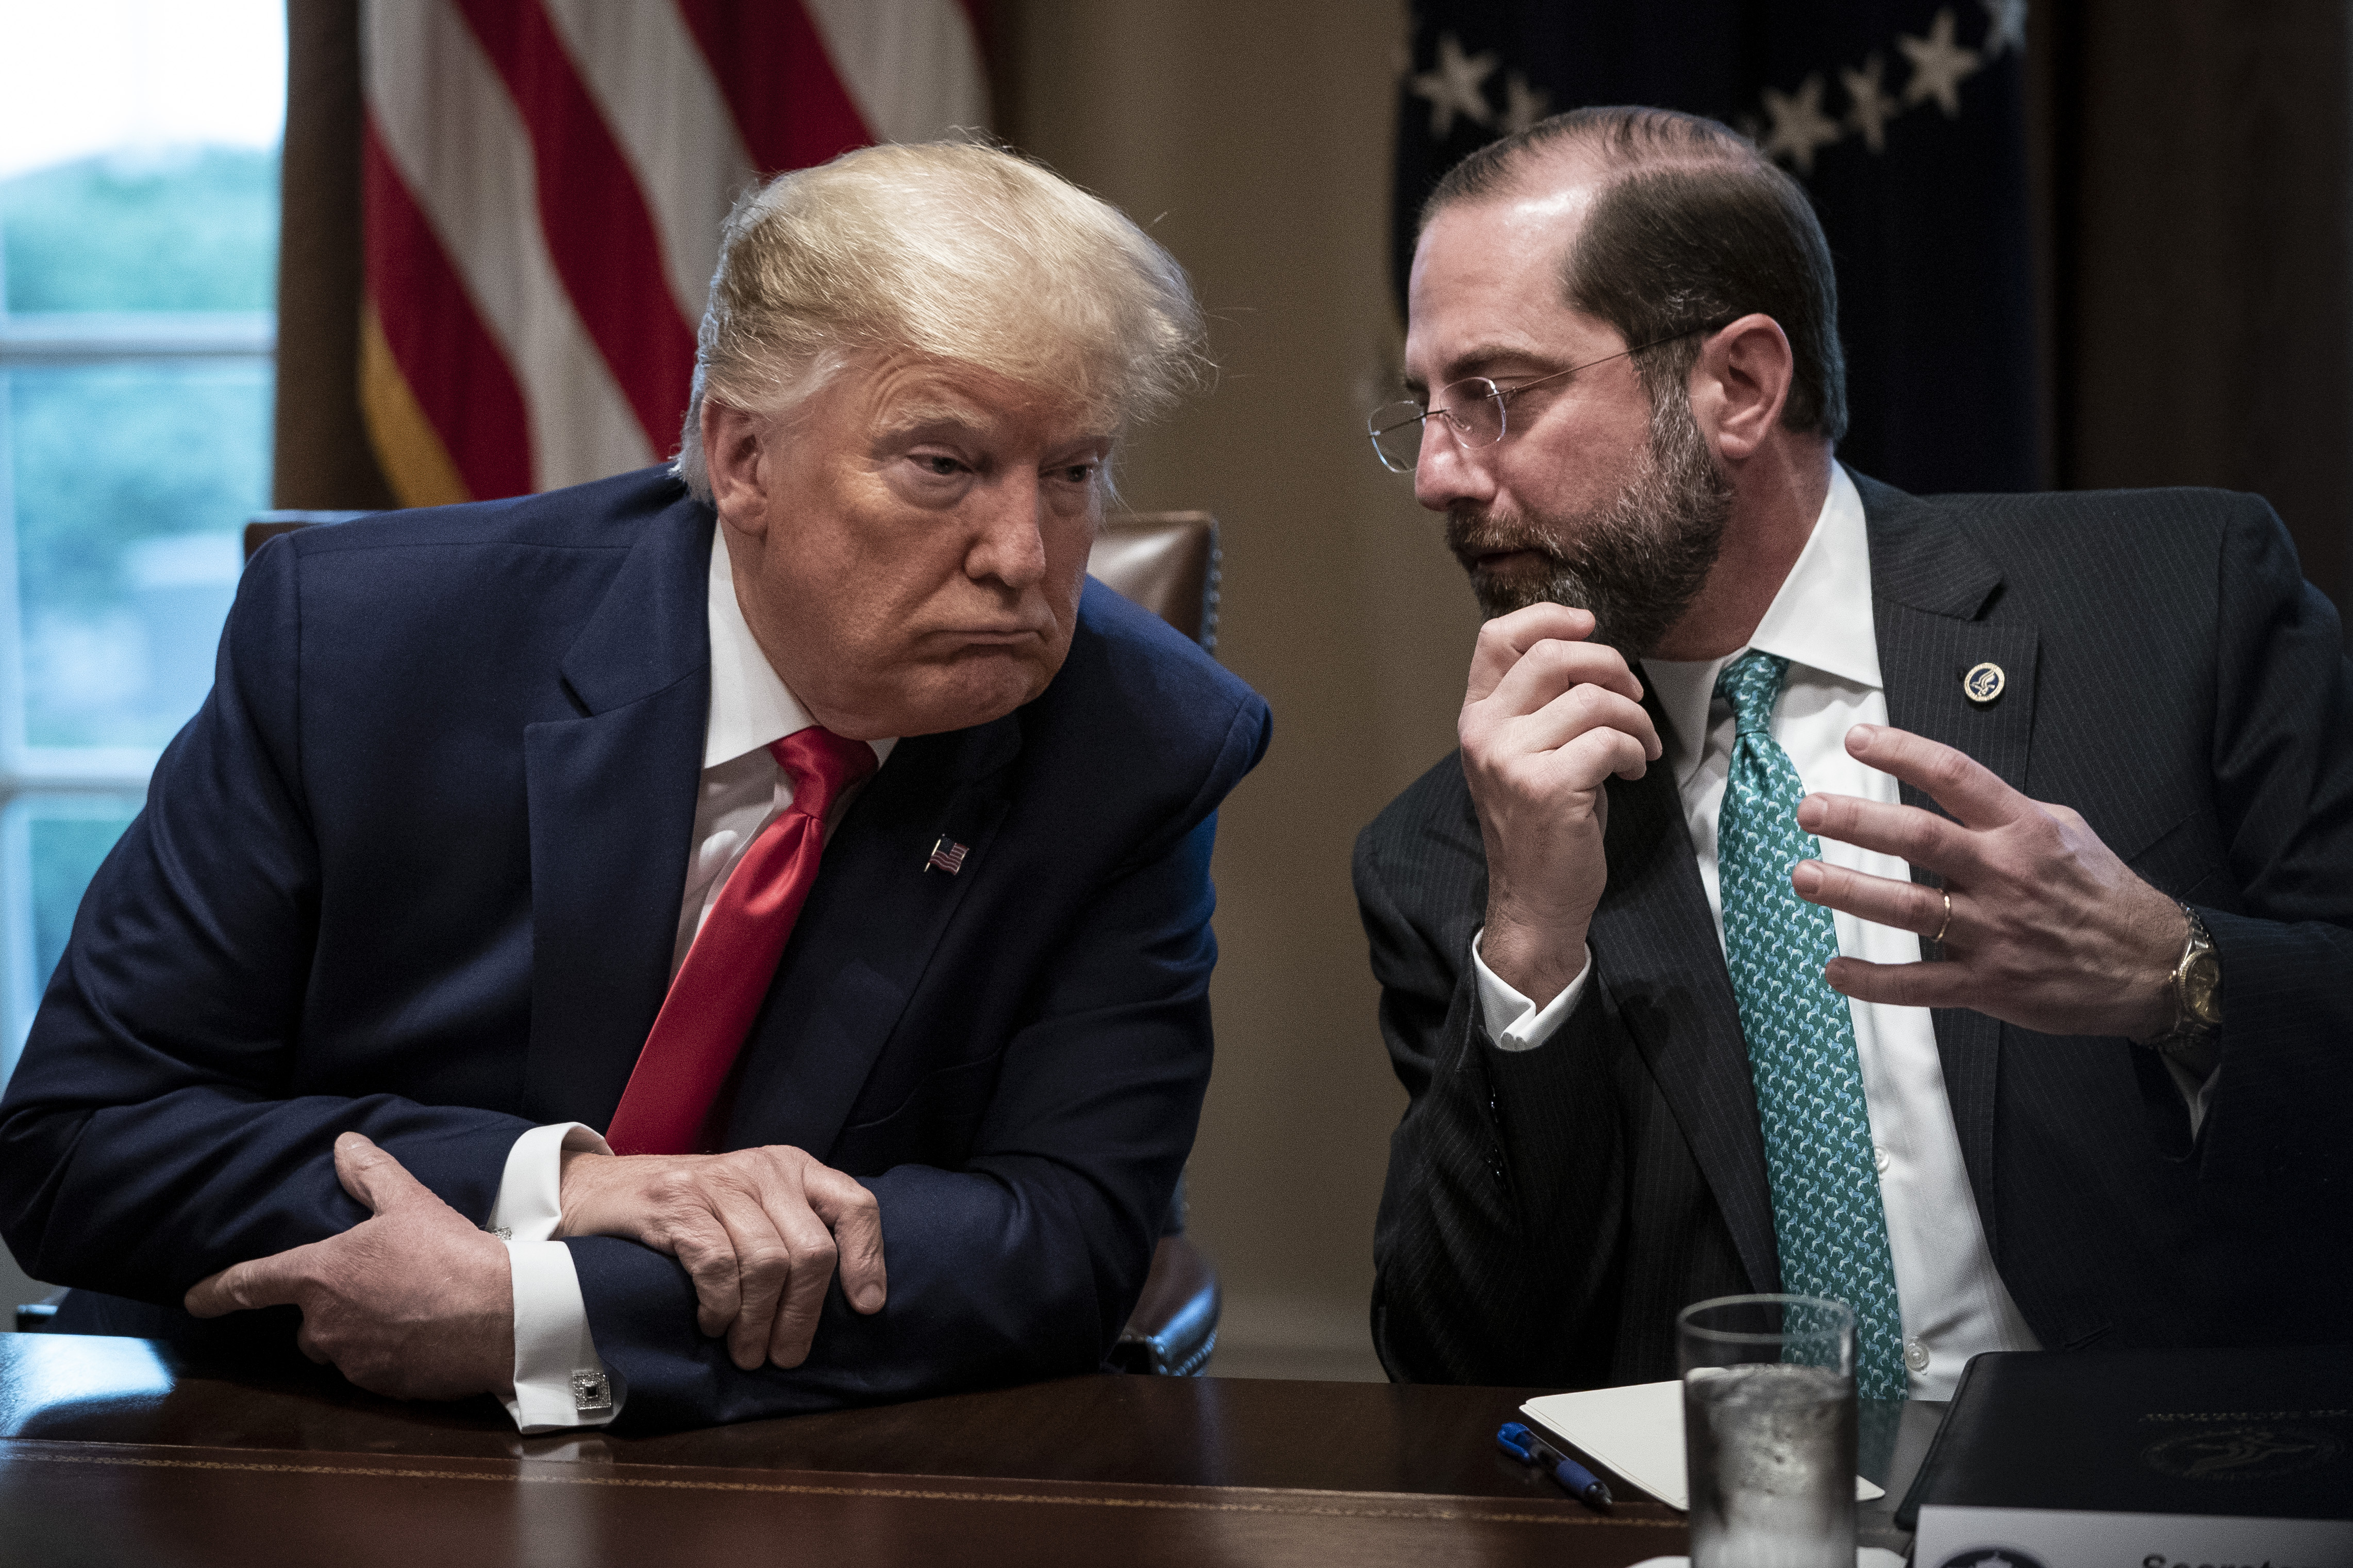 U.S. President Donald Trump speaks with Secretary of Health and Human Services Alex Azar during a meeting with the White House Coronavirus Task Force and pharmaceutical executives in Cabinet Room of the White House. (Drew Angerer/Getty Images)